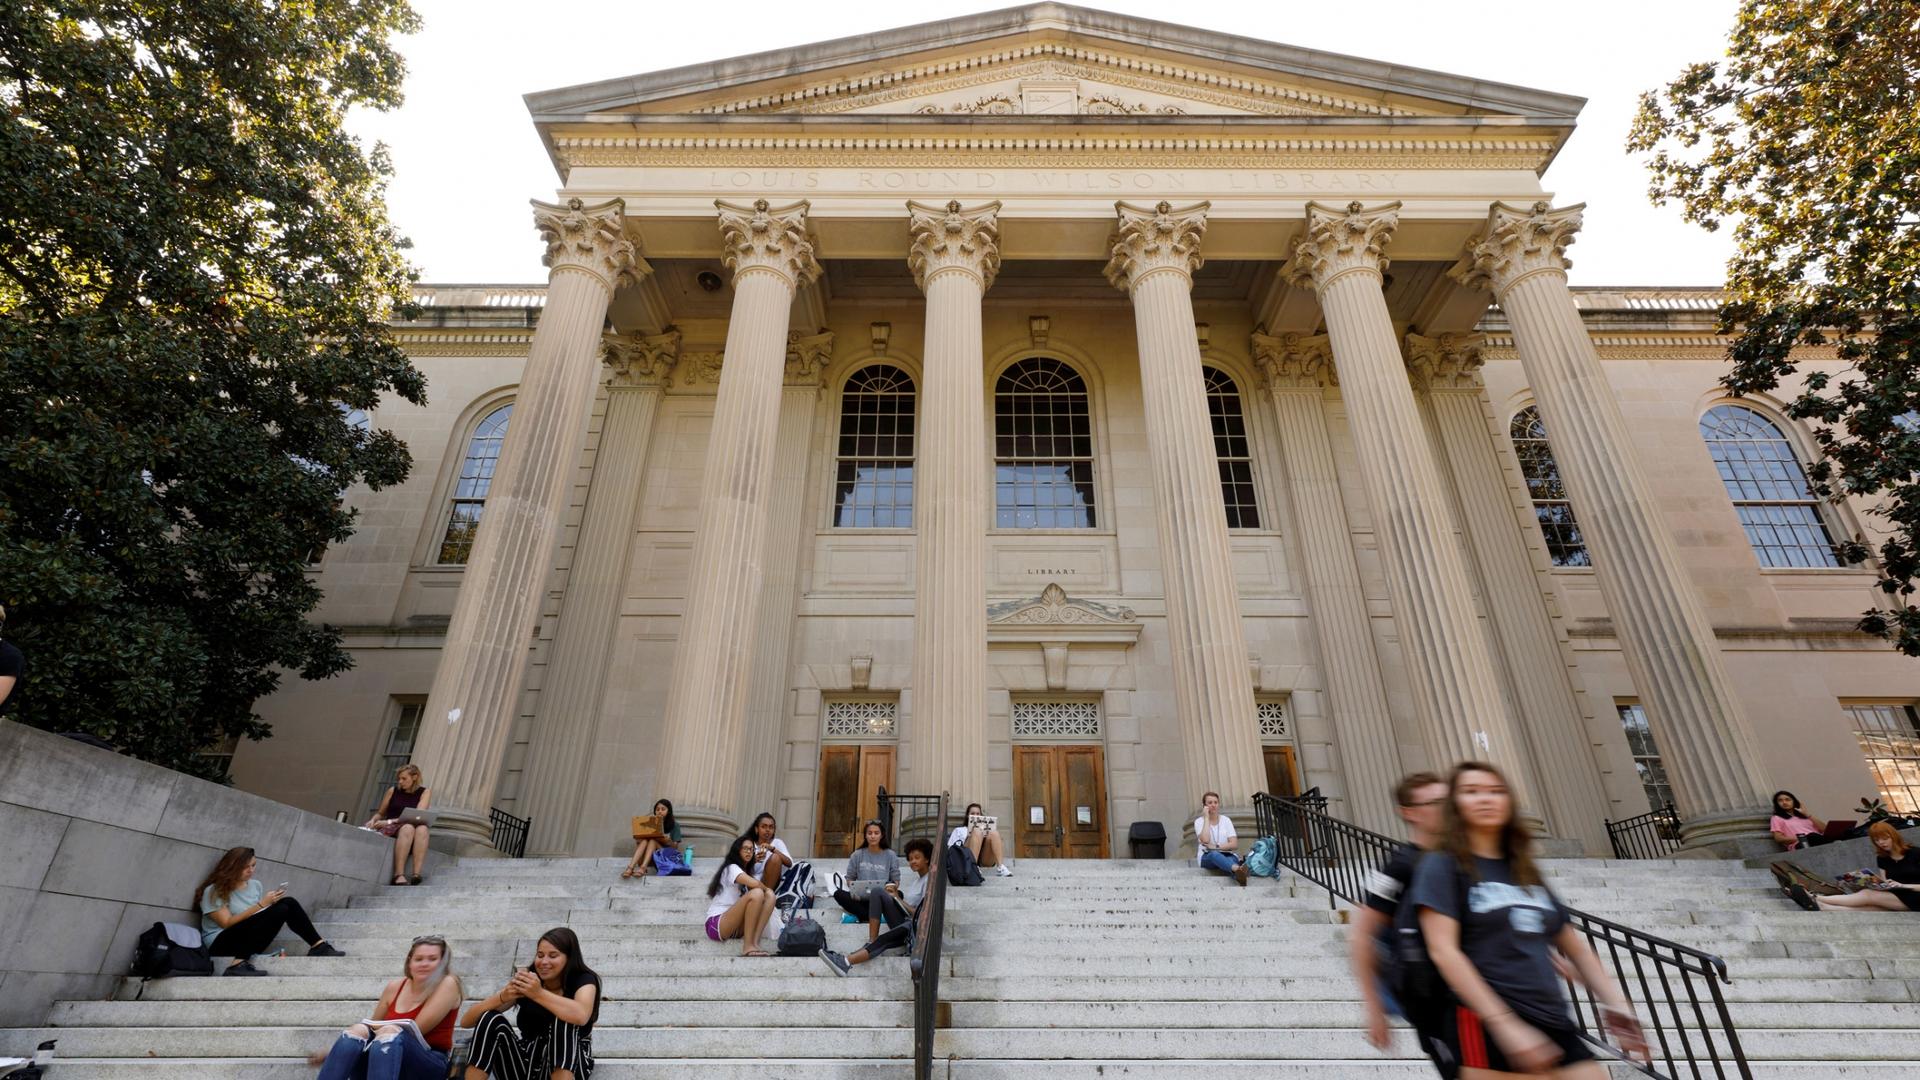 Several students are show sitting on steps with the large Greek columns at the entrance of a college library are shown in the distance.